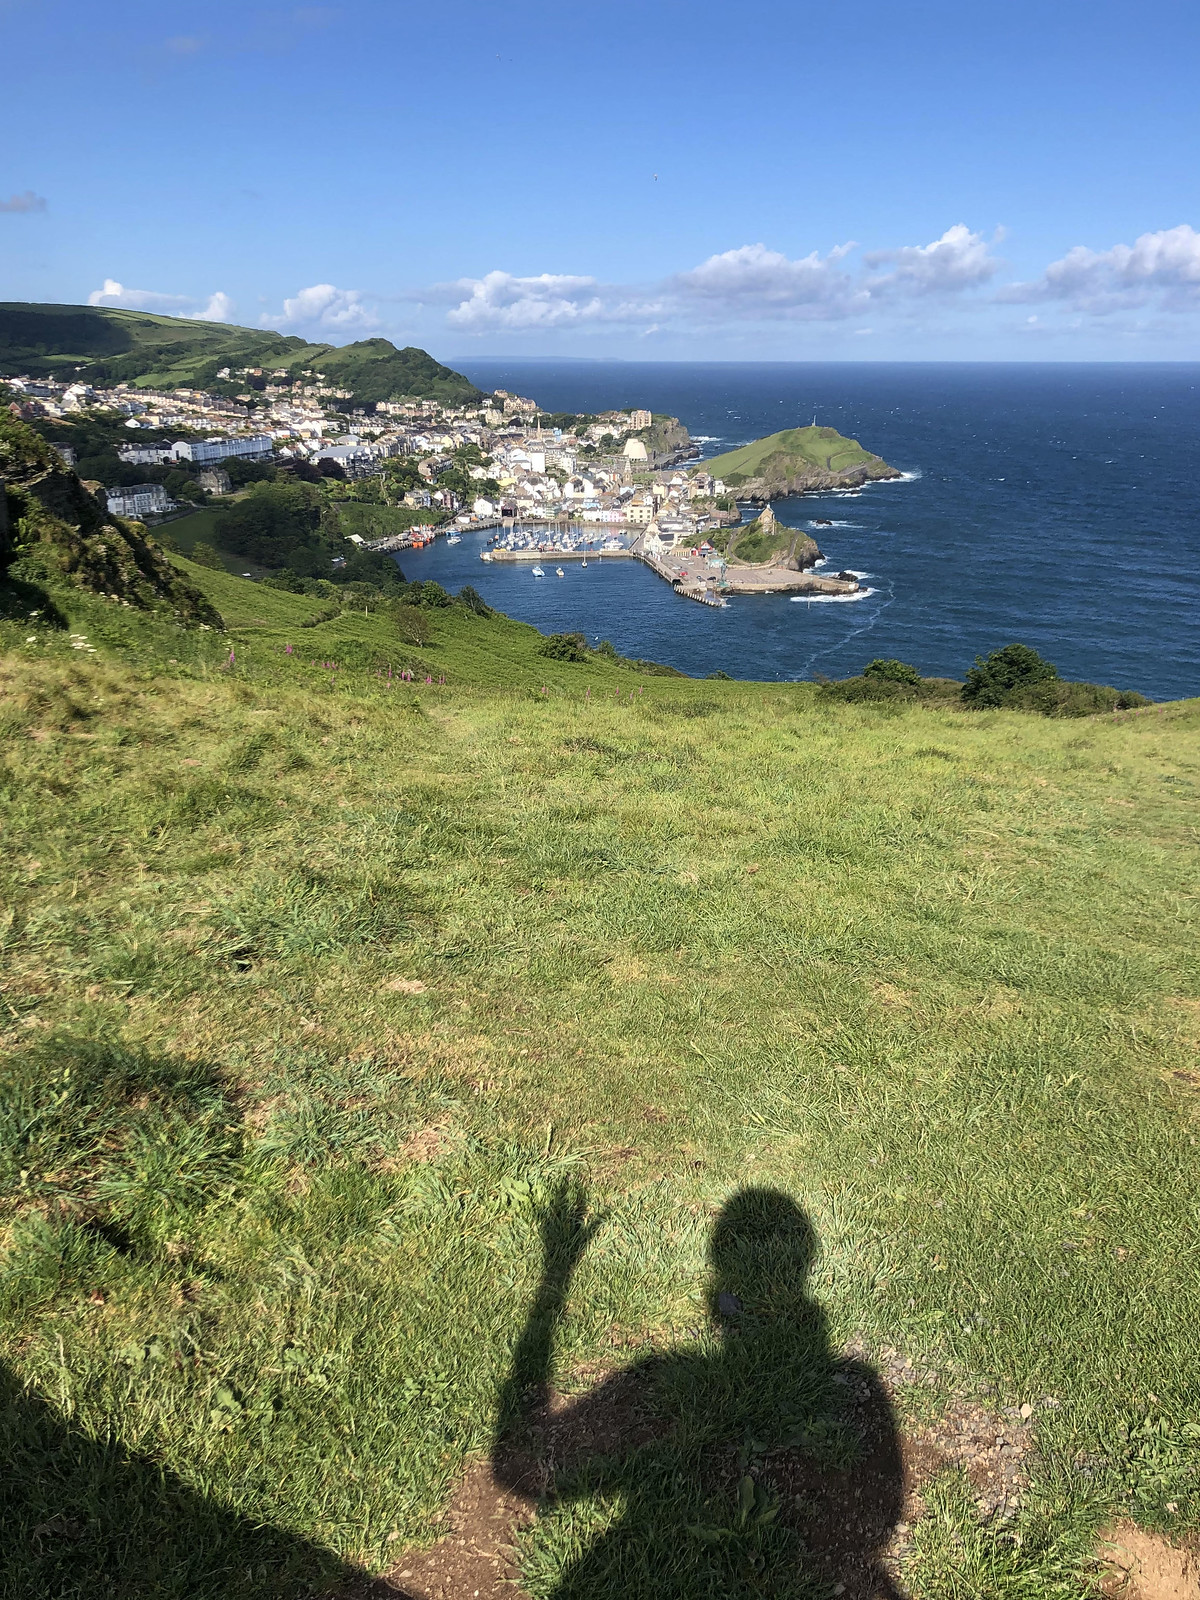 Not Dressed As Lamb, My Year in Review (Part 2 of 3): Slimmeria detox retreat walk in Ilfracombe